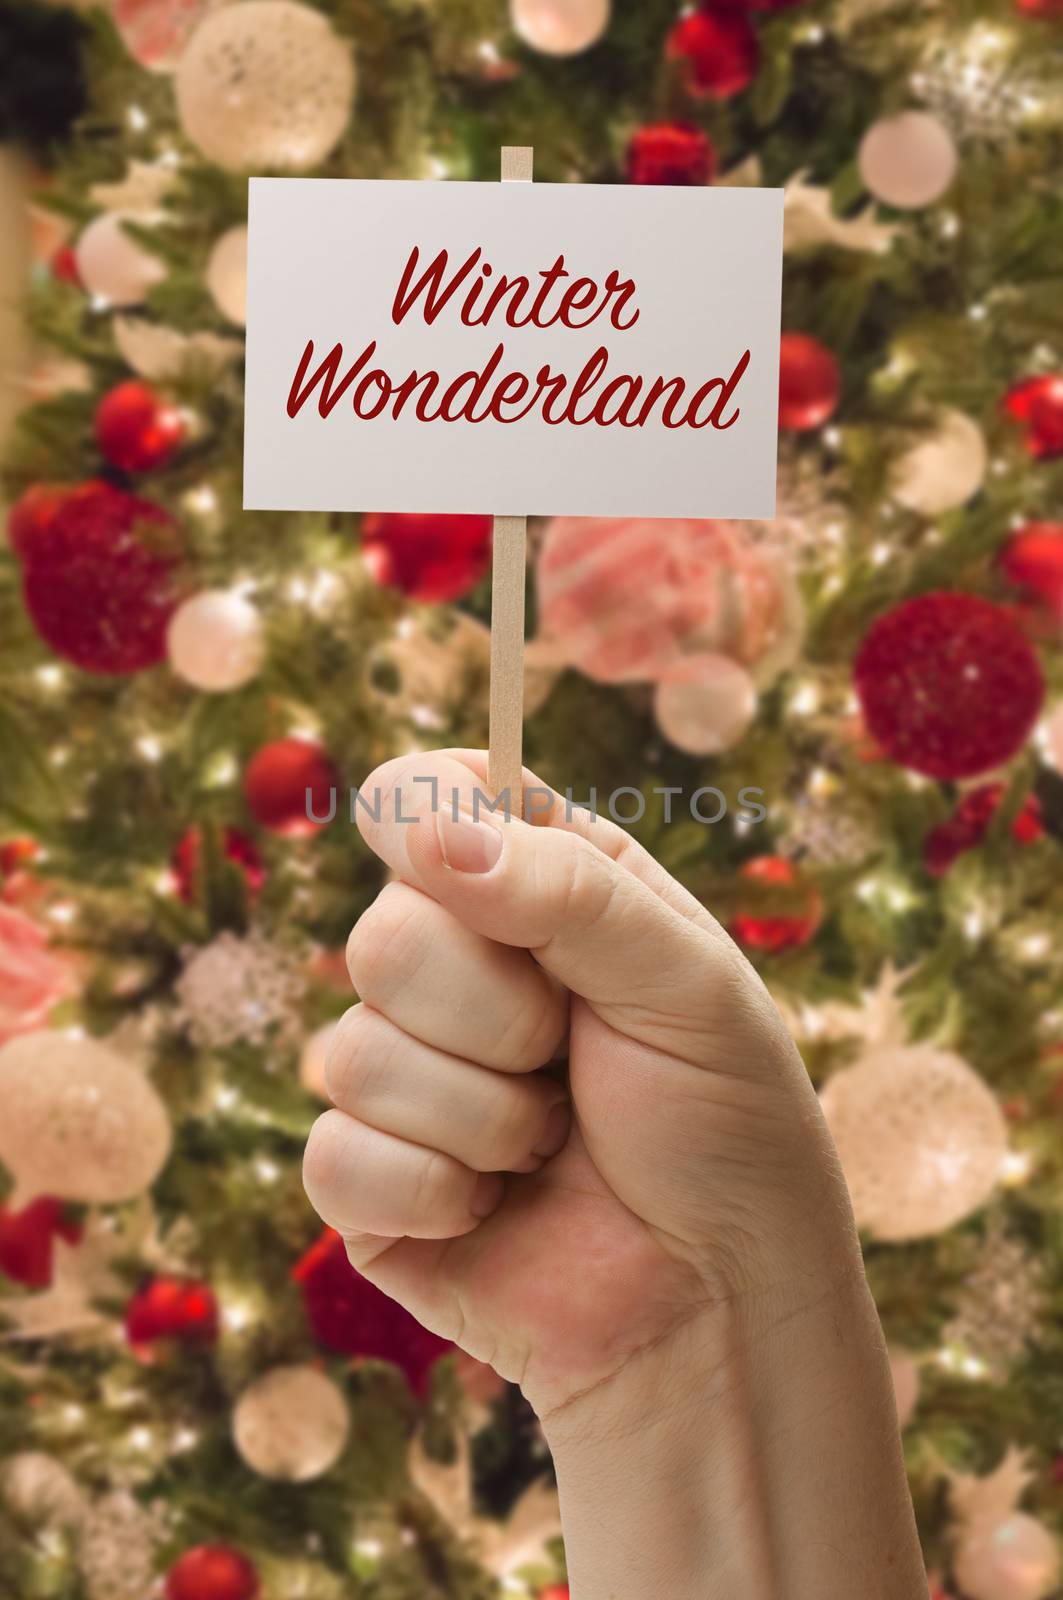 Hand Holding Winter Wonderland Card In Front of Decorated Christmas Tree.